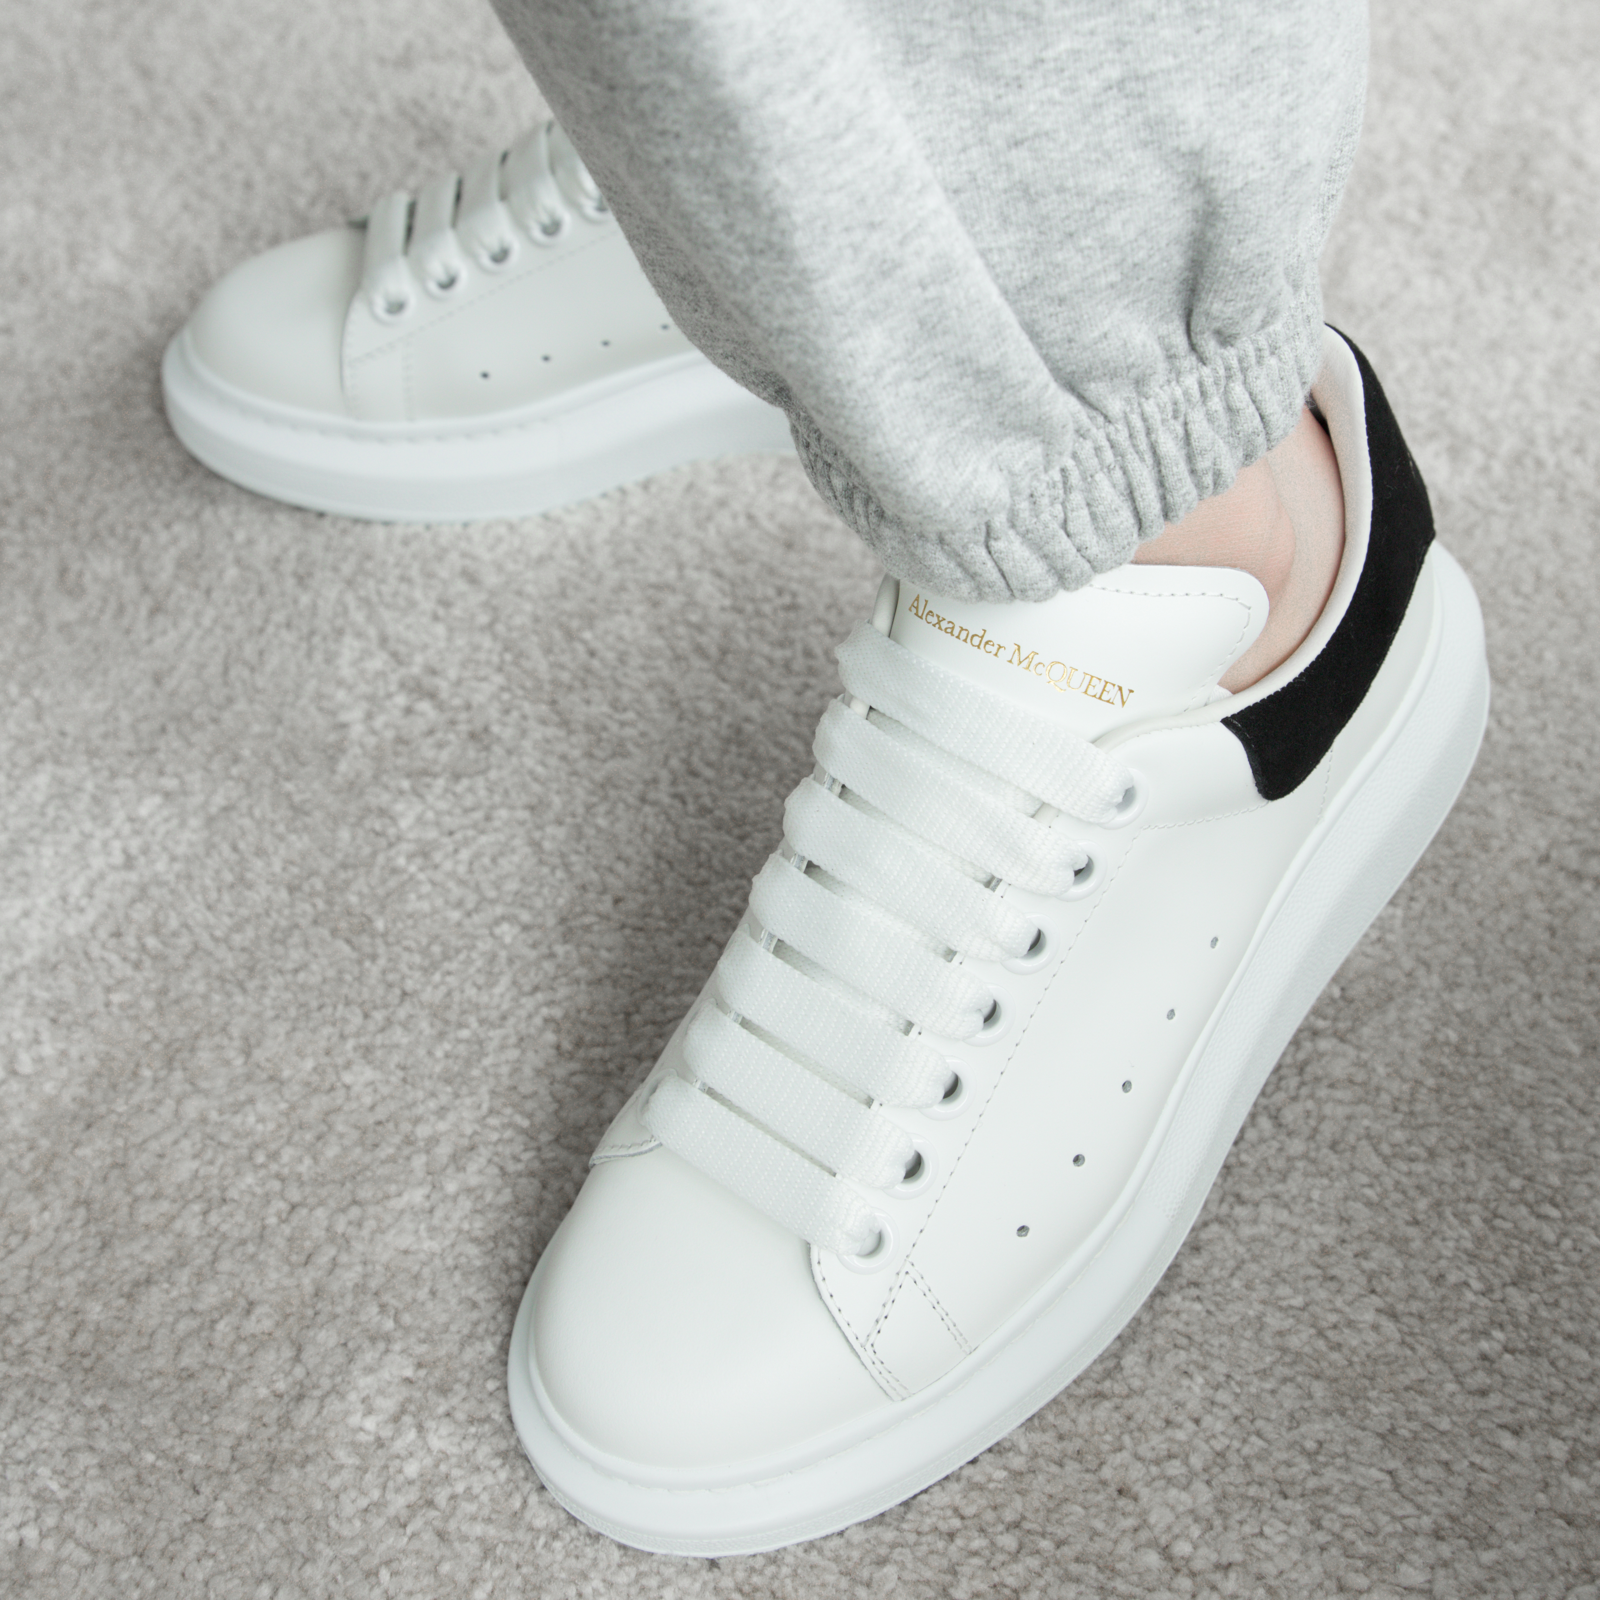 Alexander McQueen - Oversized Sneaker  HBX - Globally Curated Fashion and  Lifestyle by Hypebeast